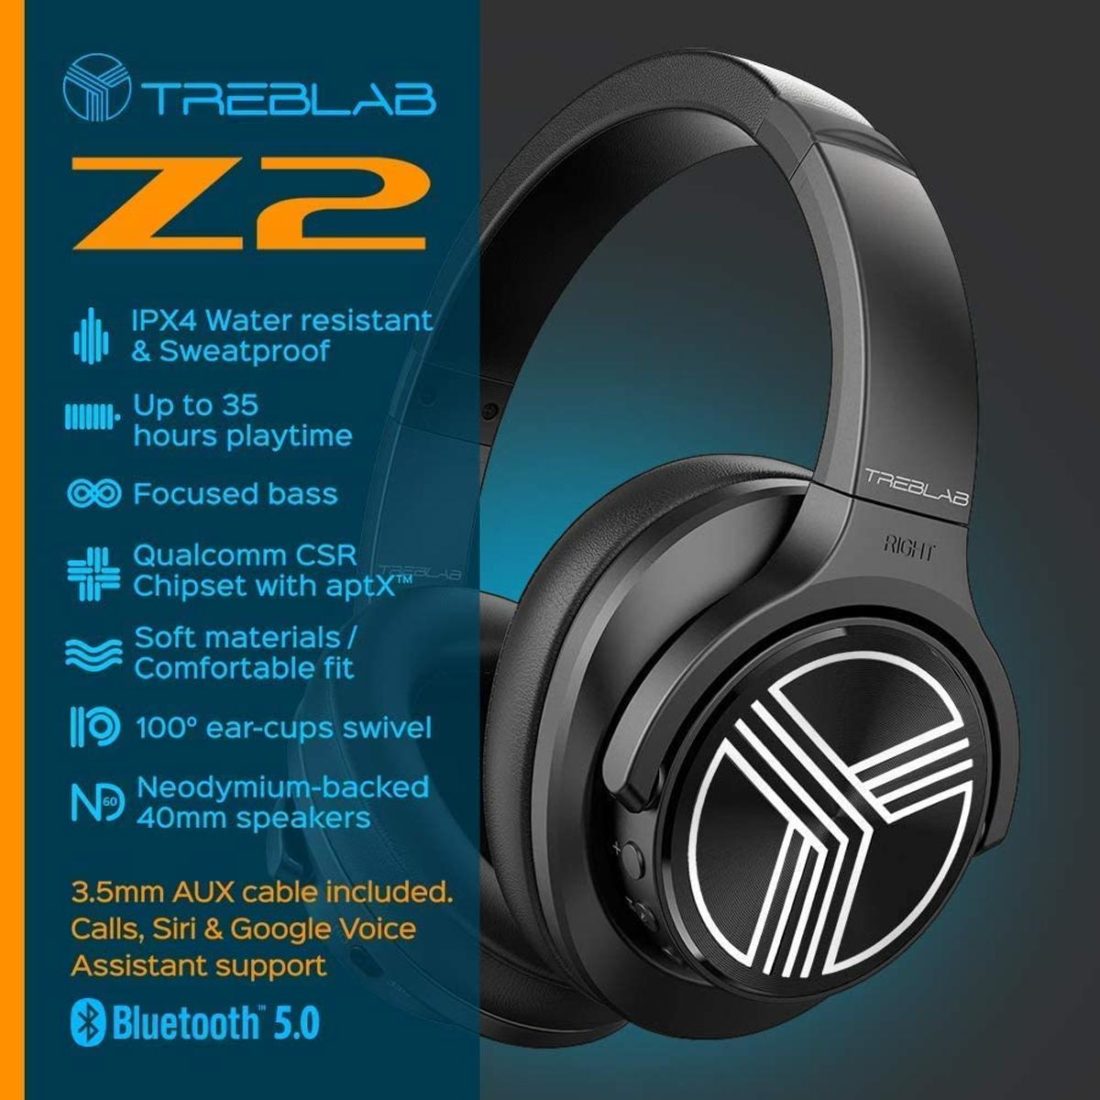 The Treblab Z2's features and specs.